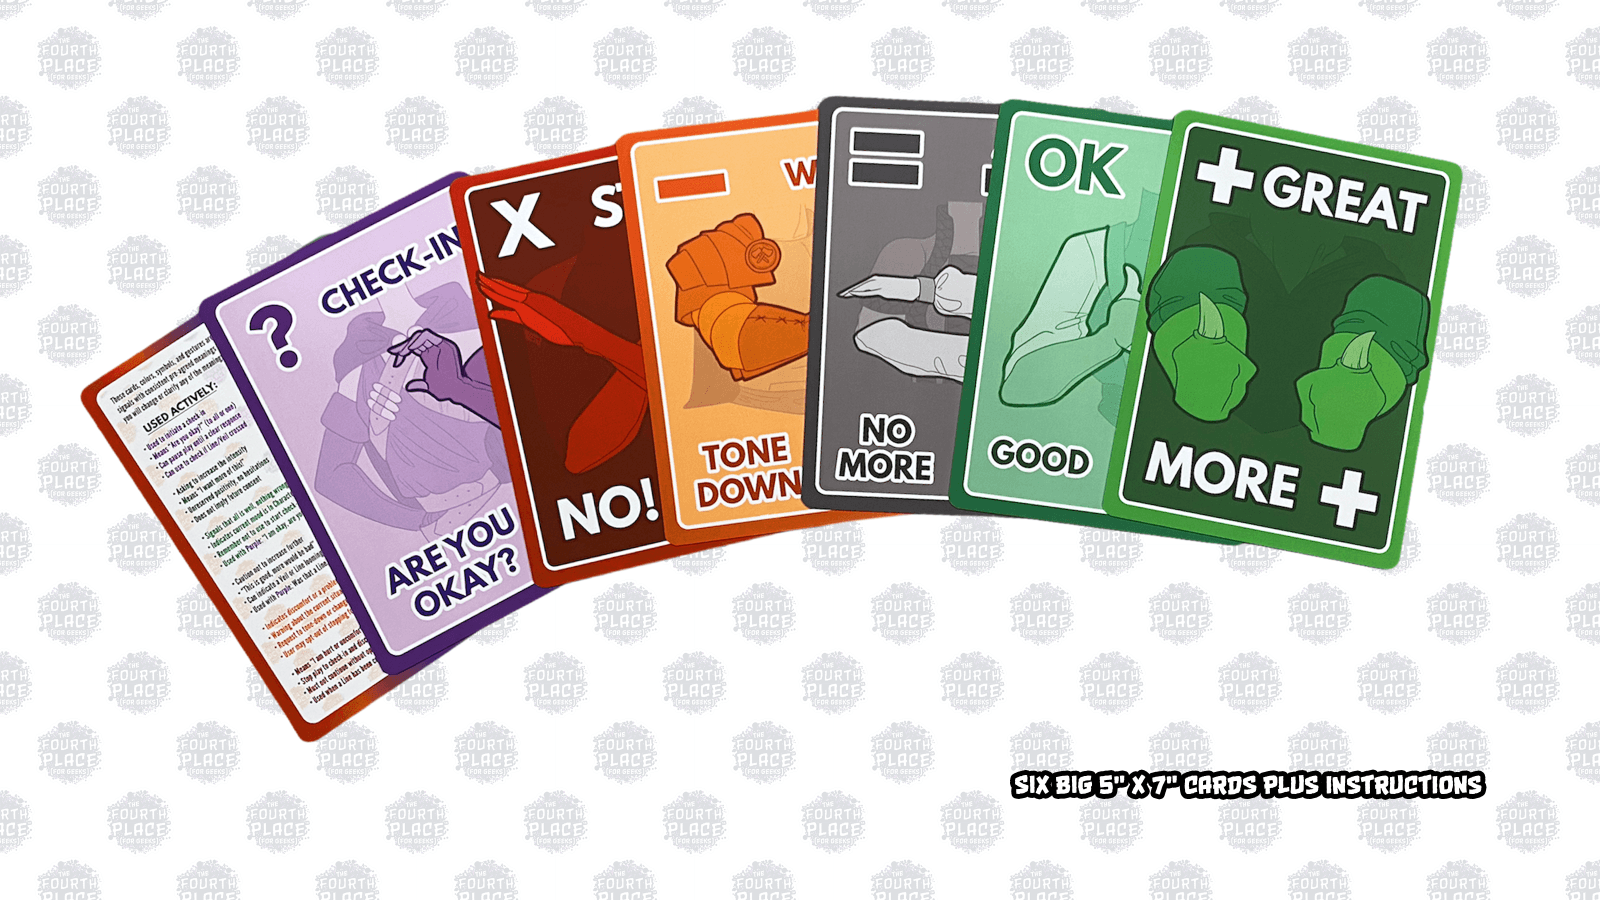 GREEN +PLUS GREAT MORE! RPG Calibration & Check-In Cards - The Fourth Place